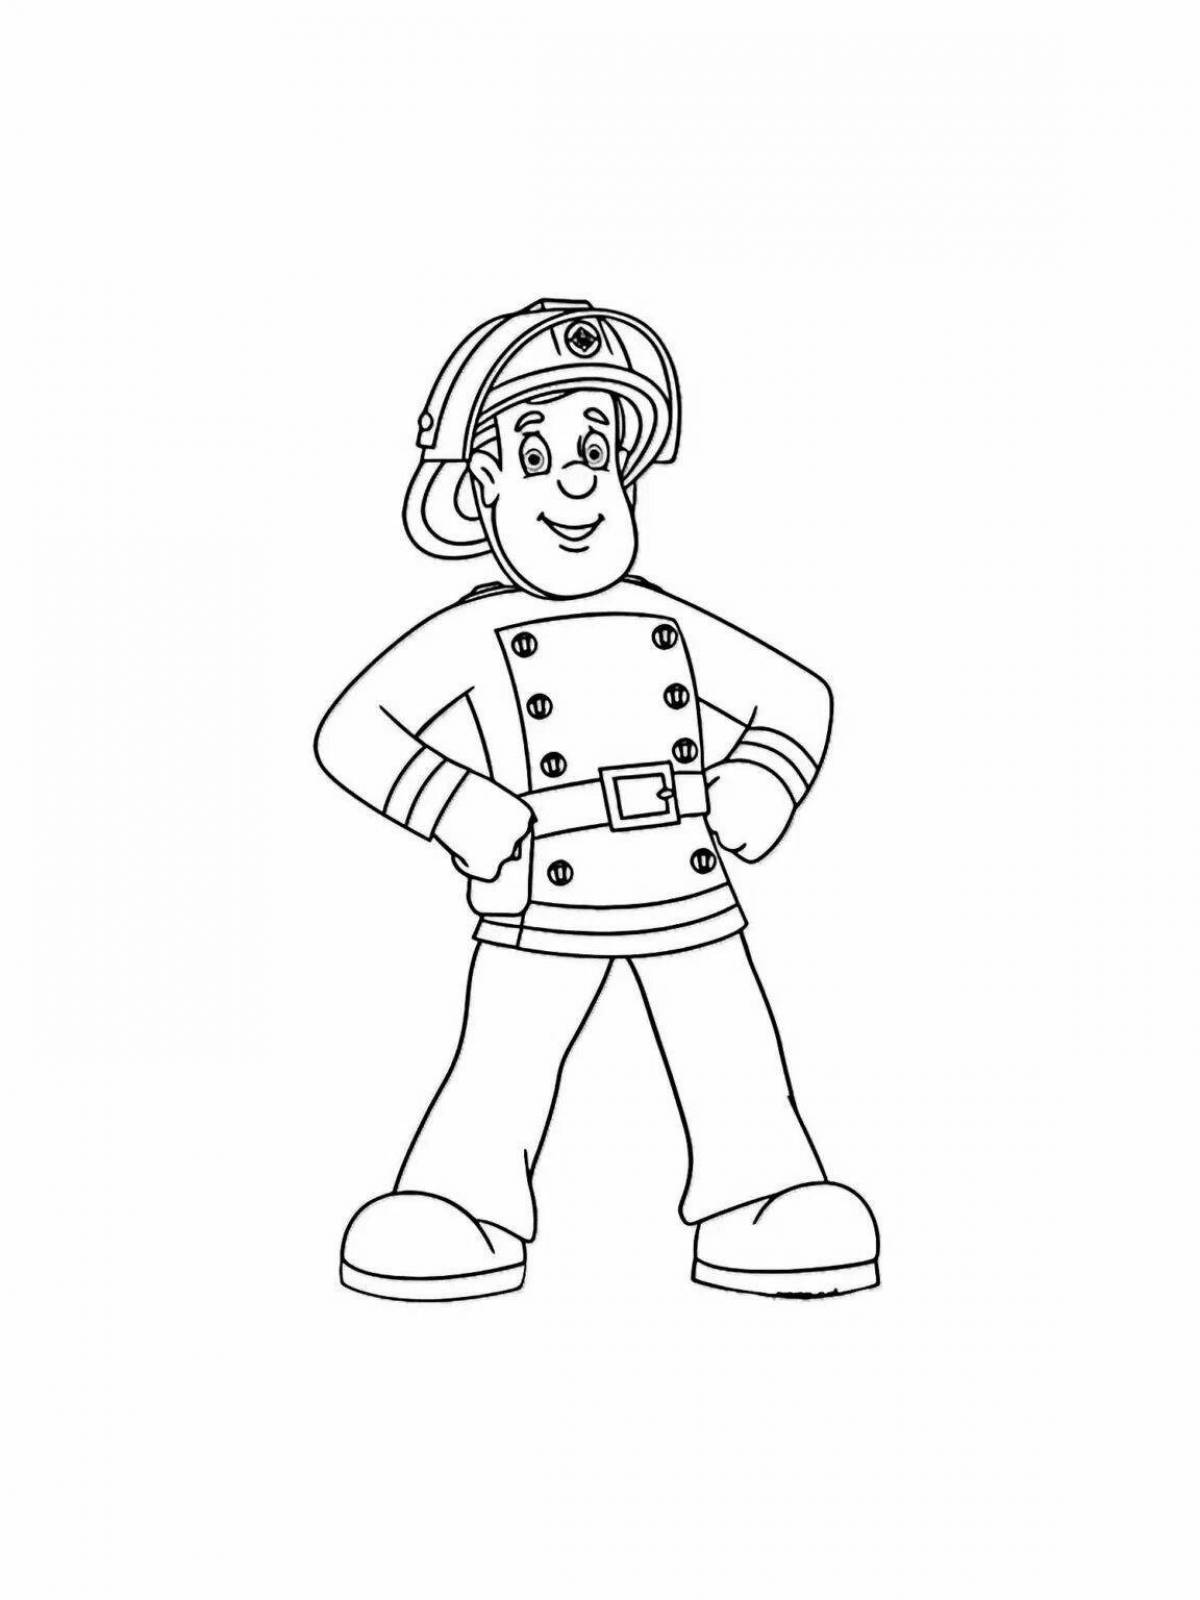 Coloring the amazing fireman sam for kids